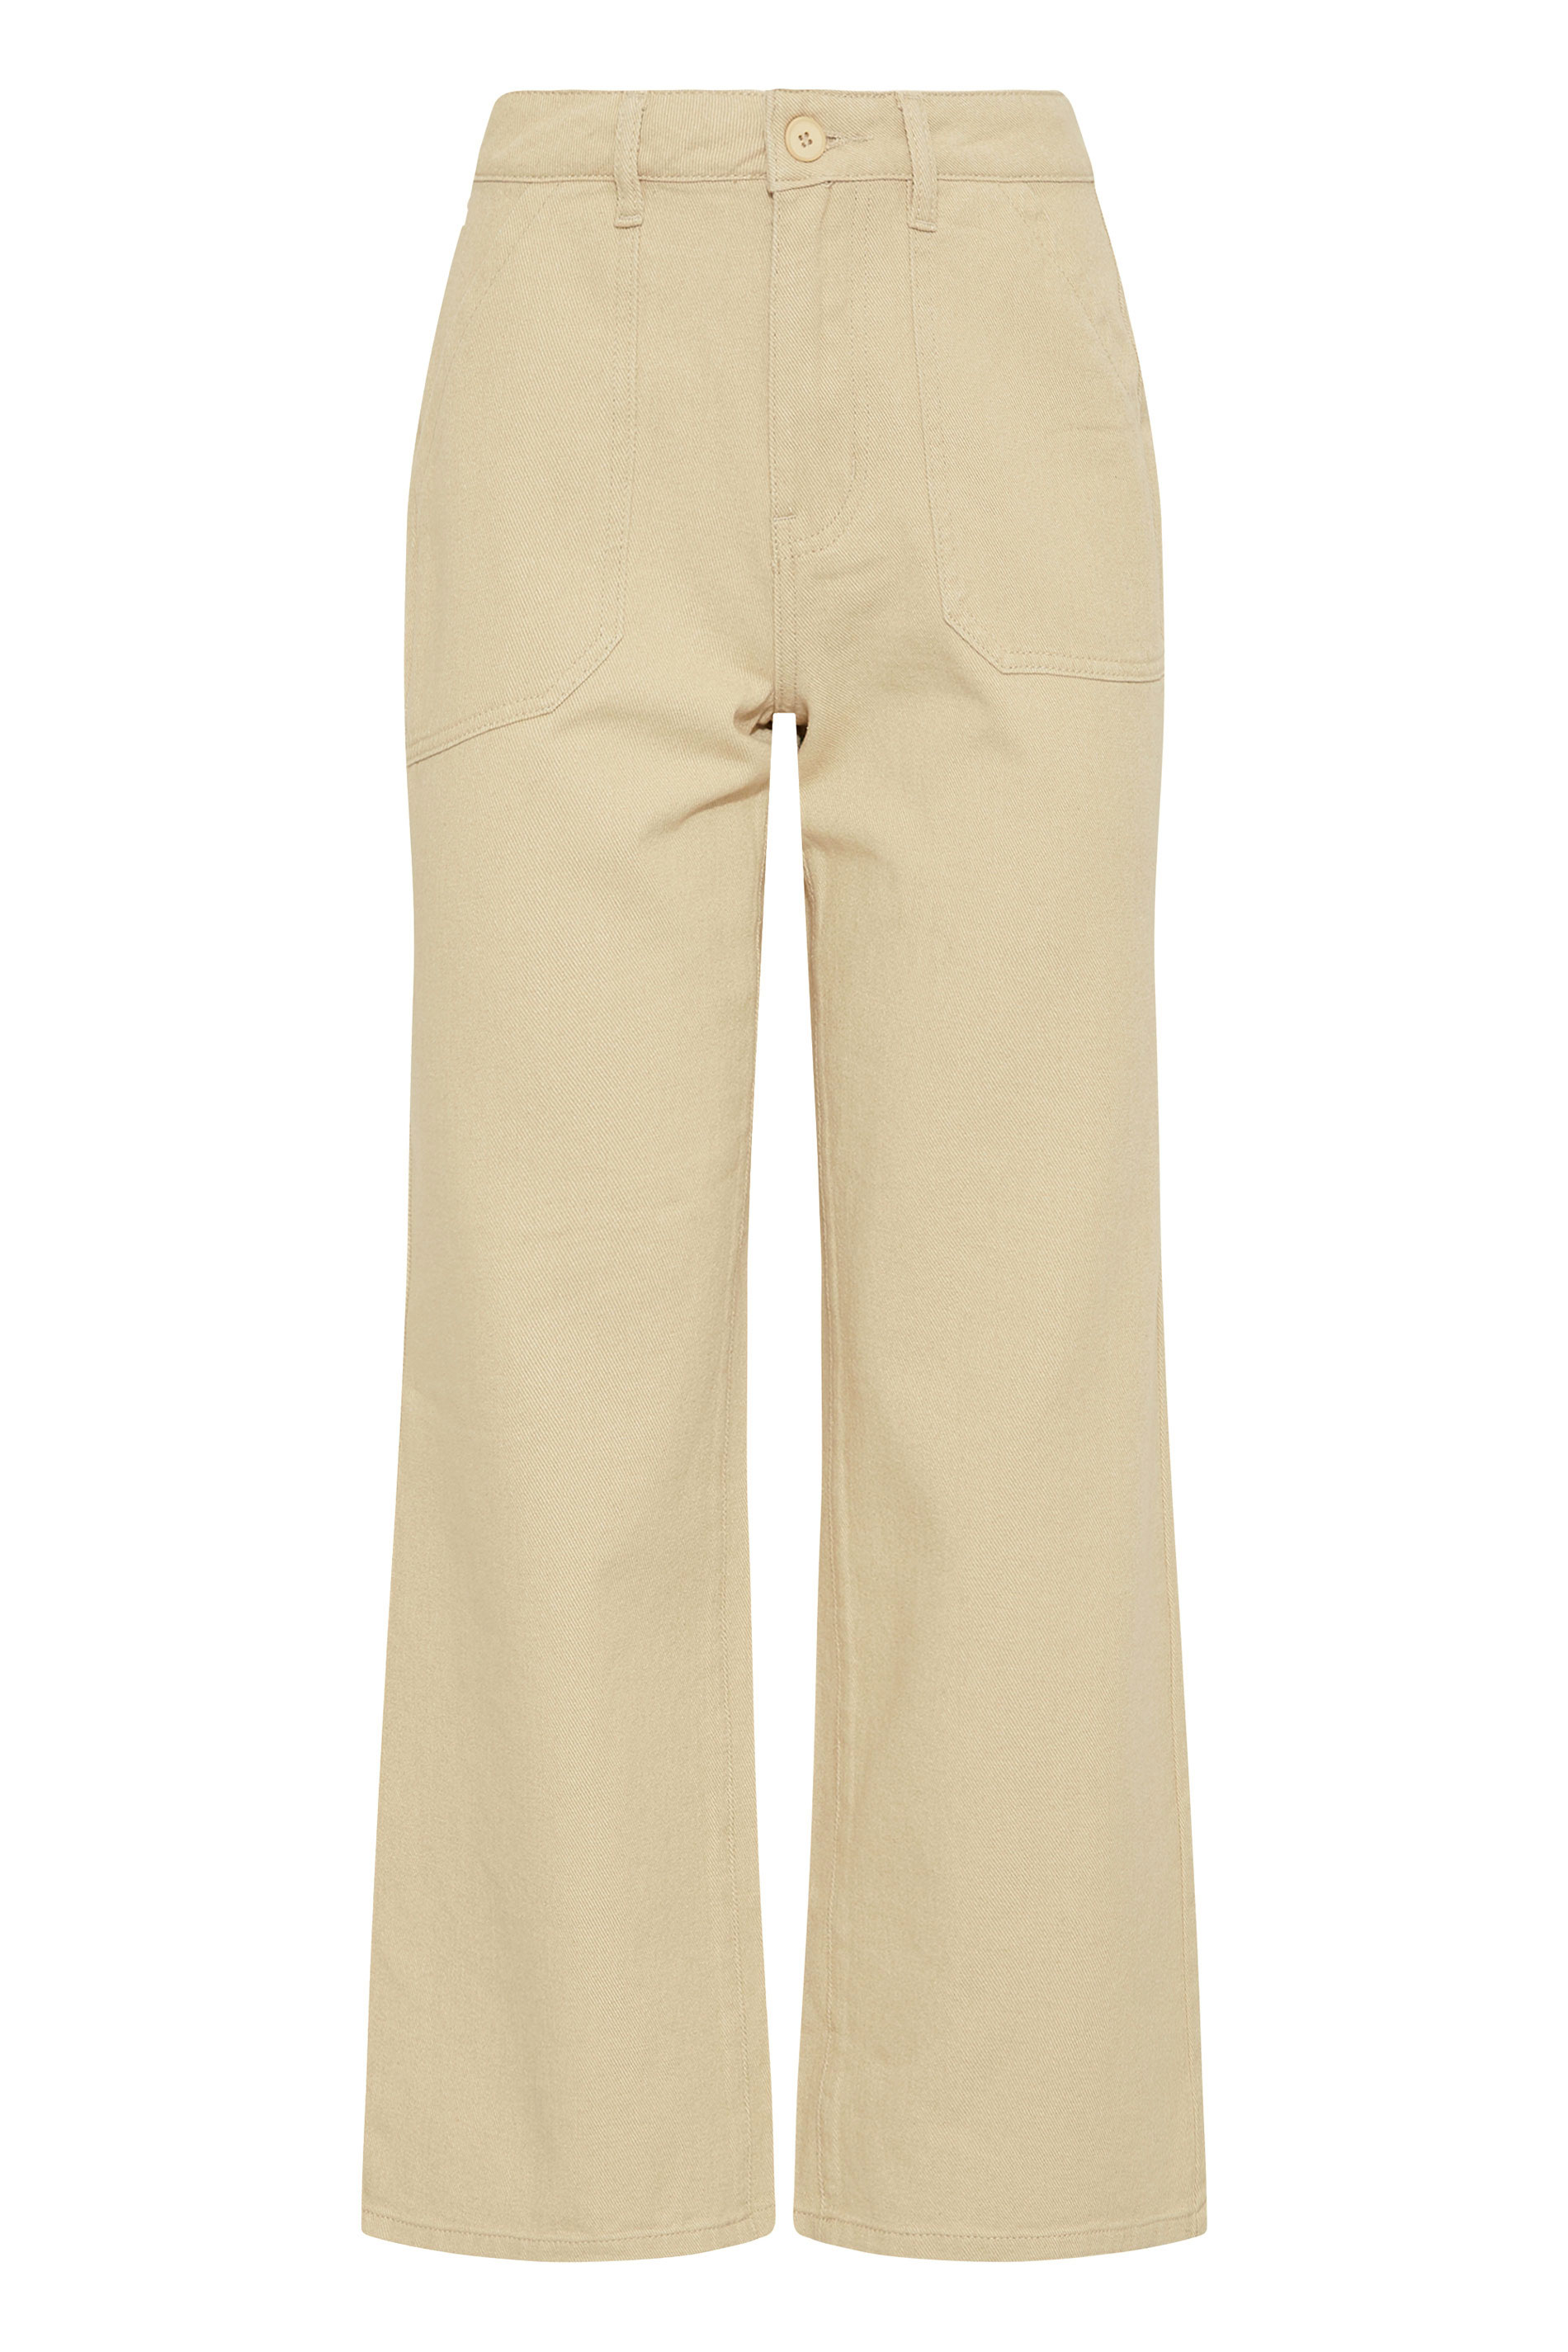 LTS Tall Women's Cream Cotton Twill Wide Leg Cropped Trousers | Long Tall Sally 1